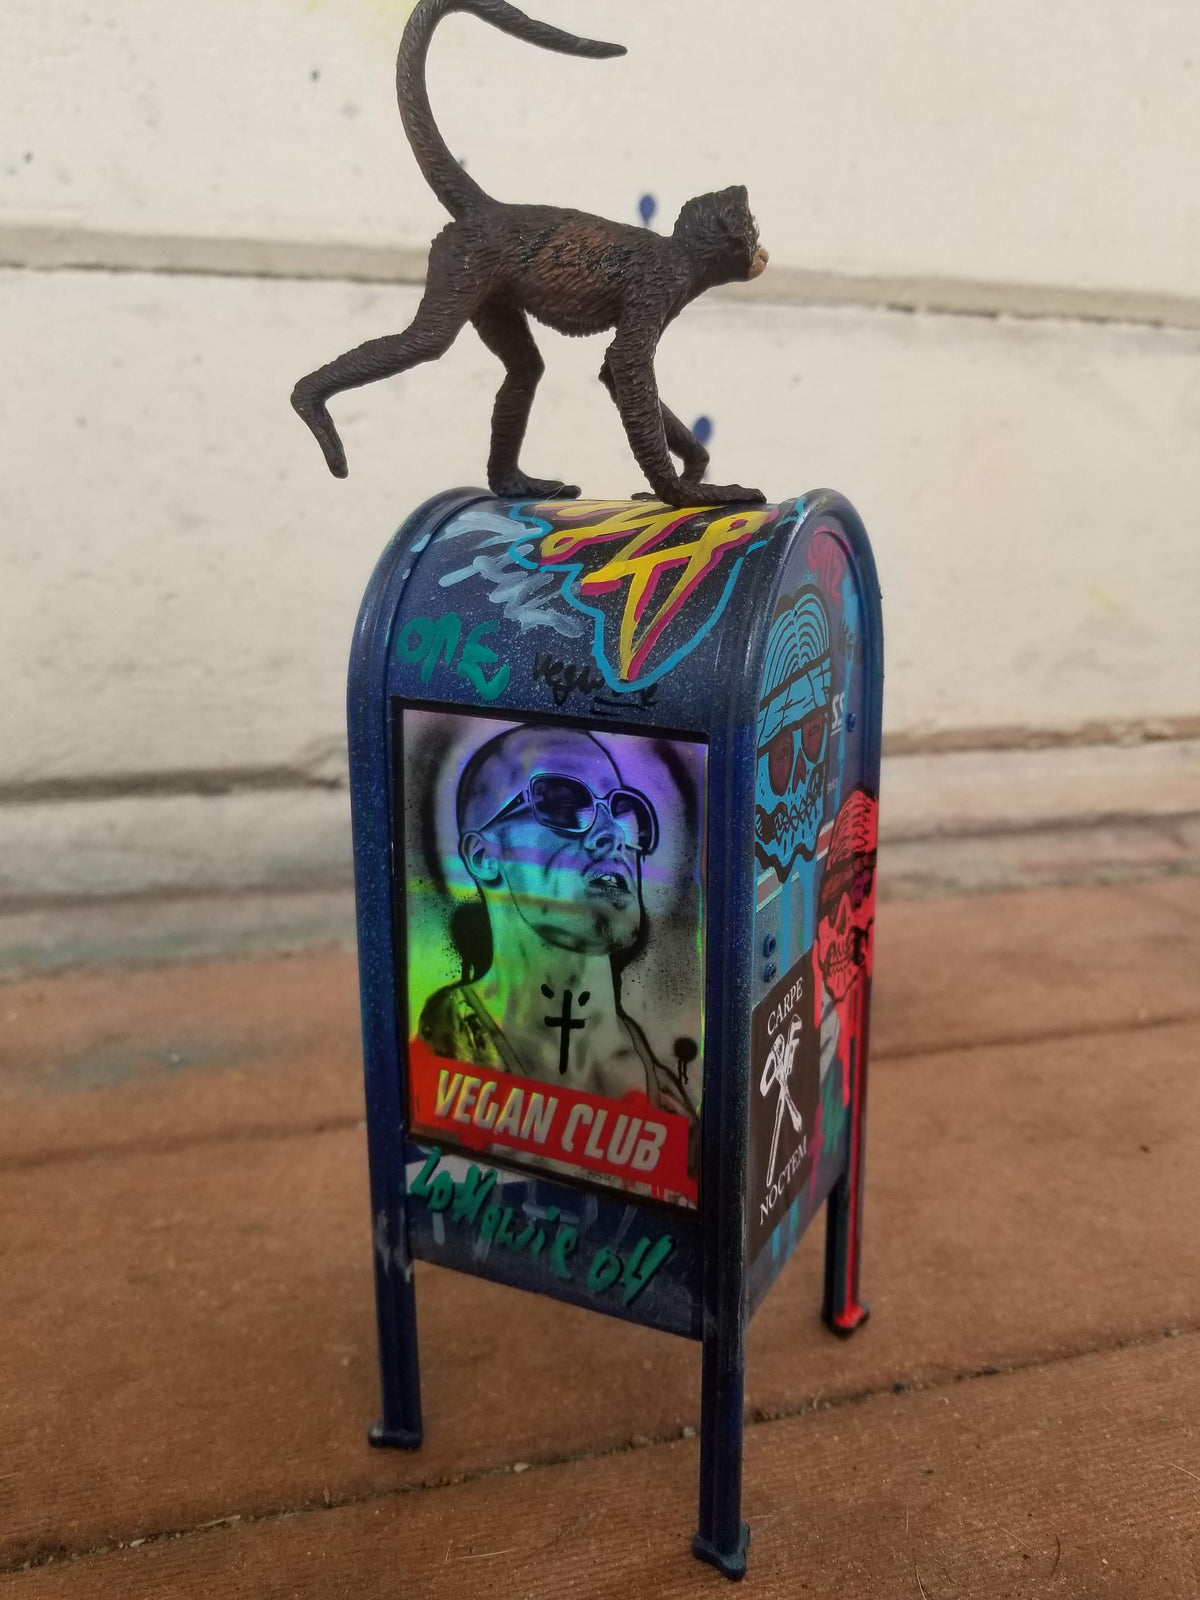 USPS Mailbox Collectible with monkey on top tagged by Vegan Club, art by @_actions_not_words